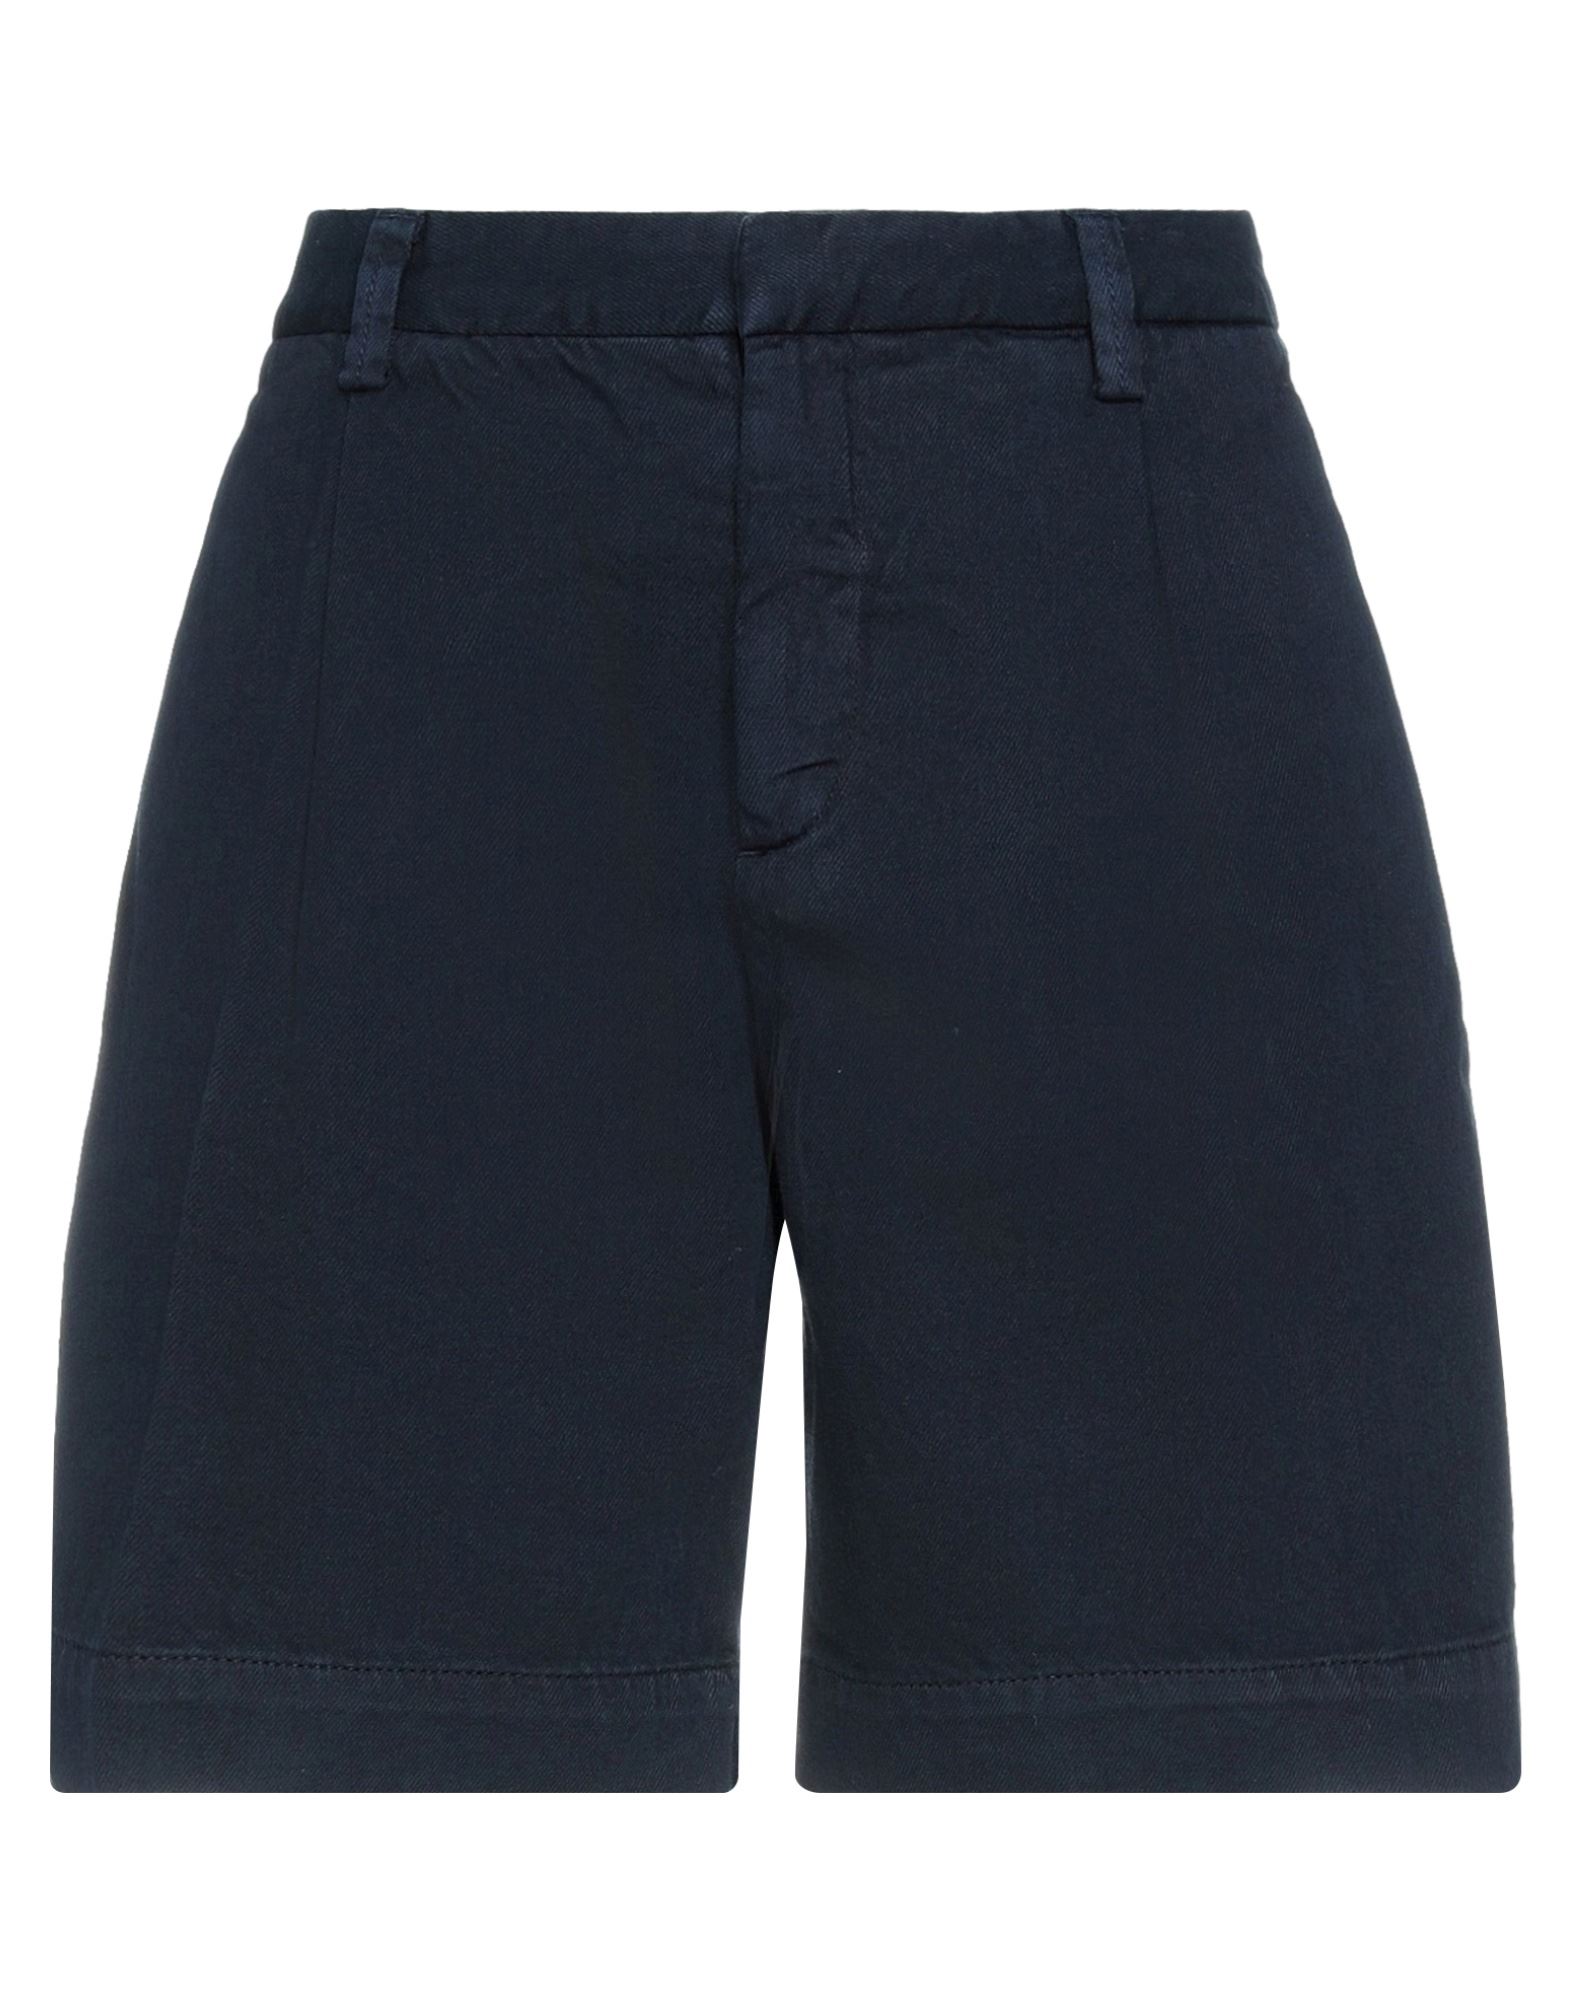 Must Have ROŸ ROGER'S Shorts & Bermuda Shorts from ROŸ ROGER'S ...